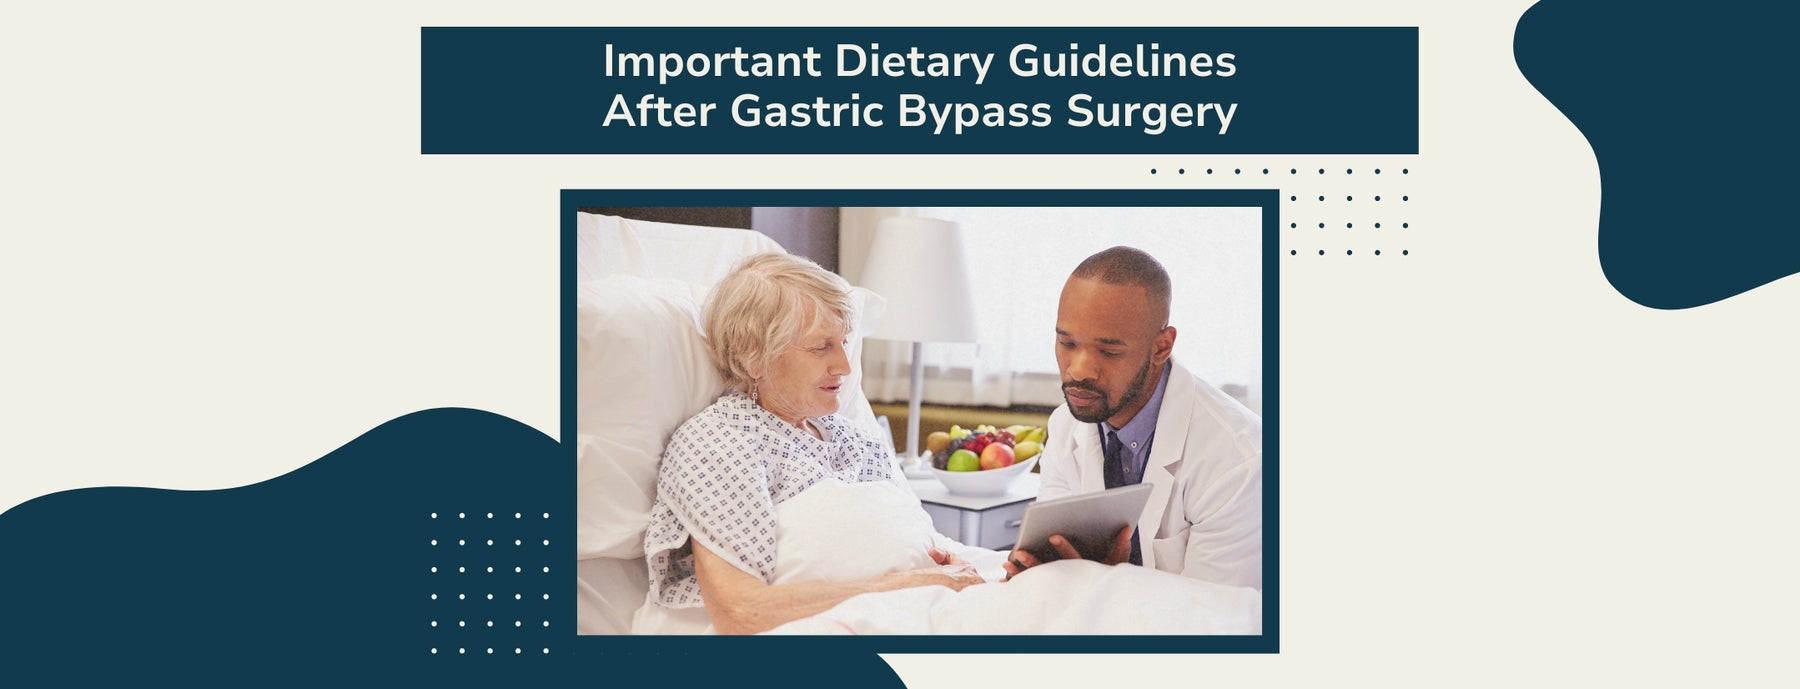 Important Dietary Guidelines After Gastric Bypass Surgery